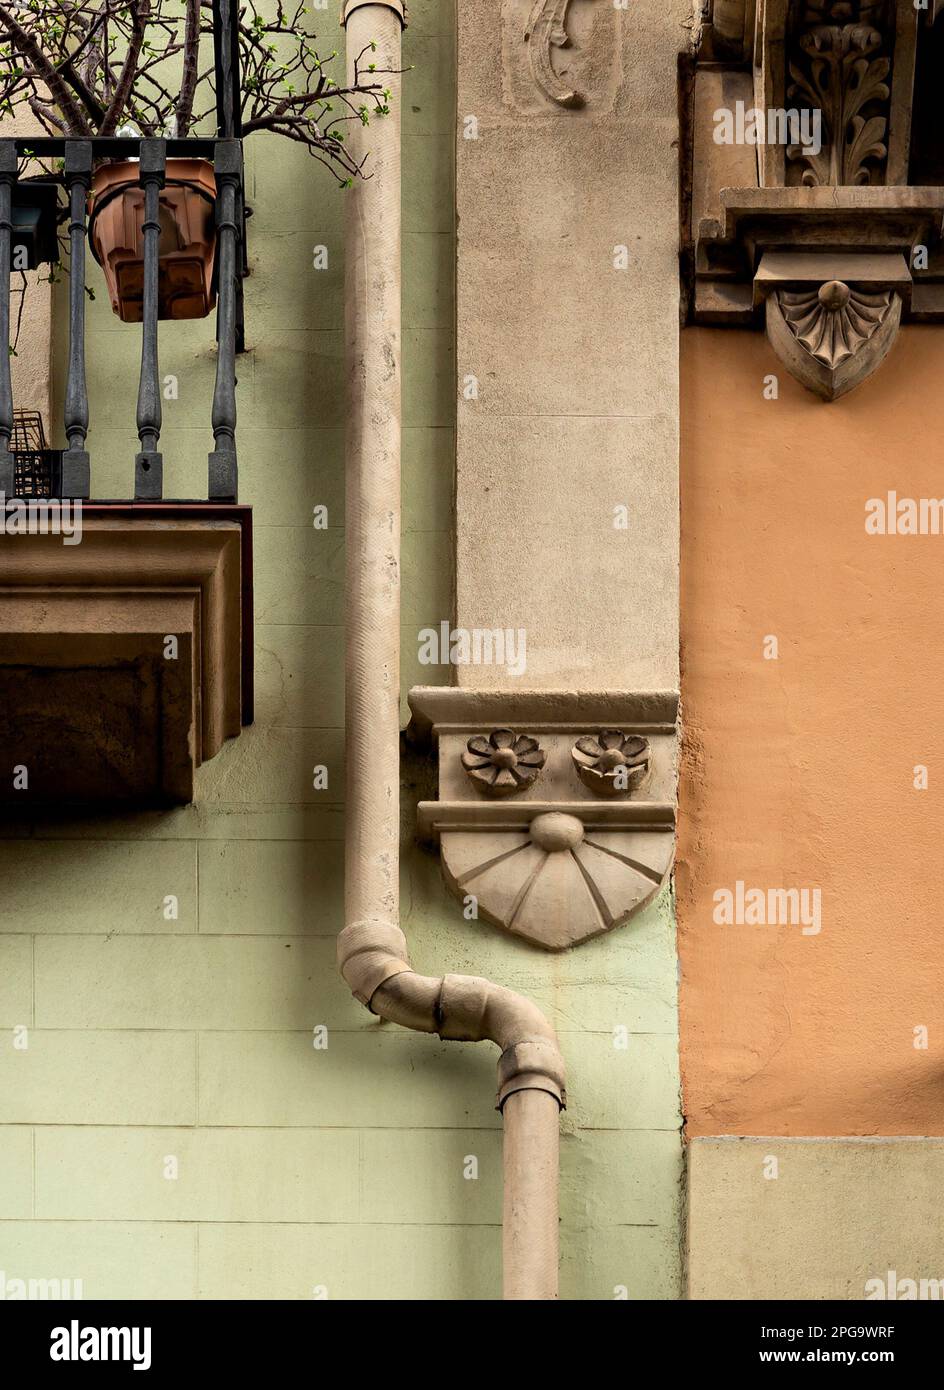 Shot in color detail on the facade of this historic building representing some character, animal or flower. Set at Eixample, Barcelona, Catalunya, Stock Photo